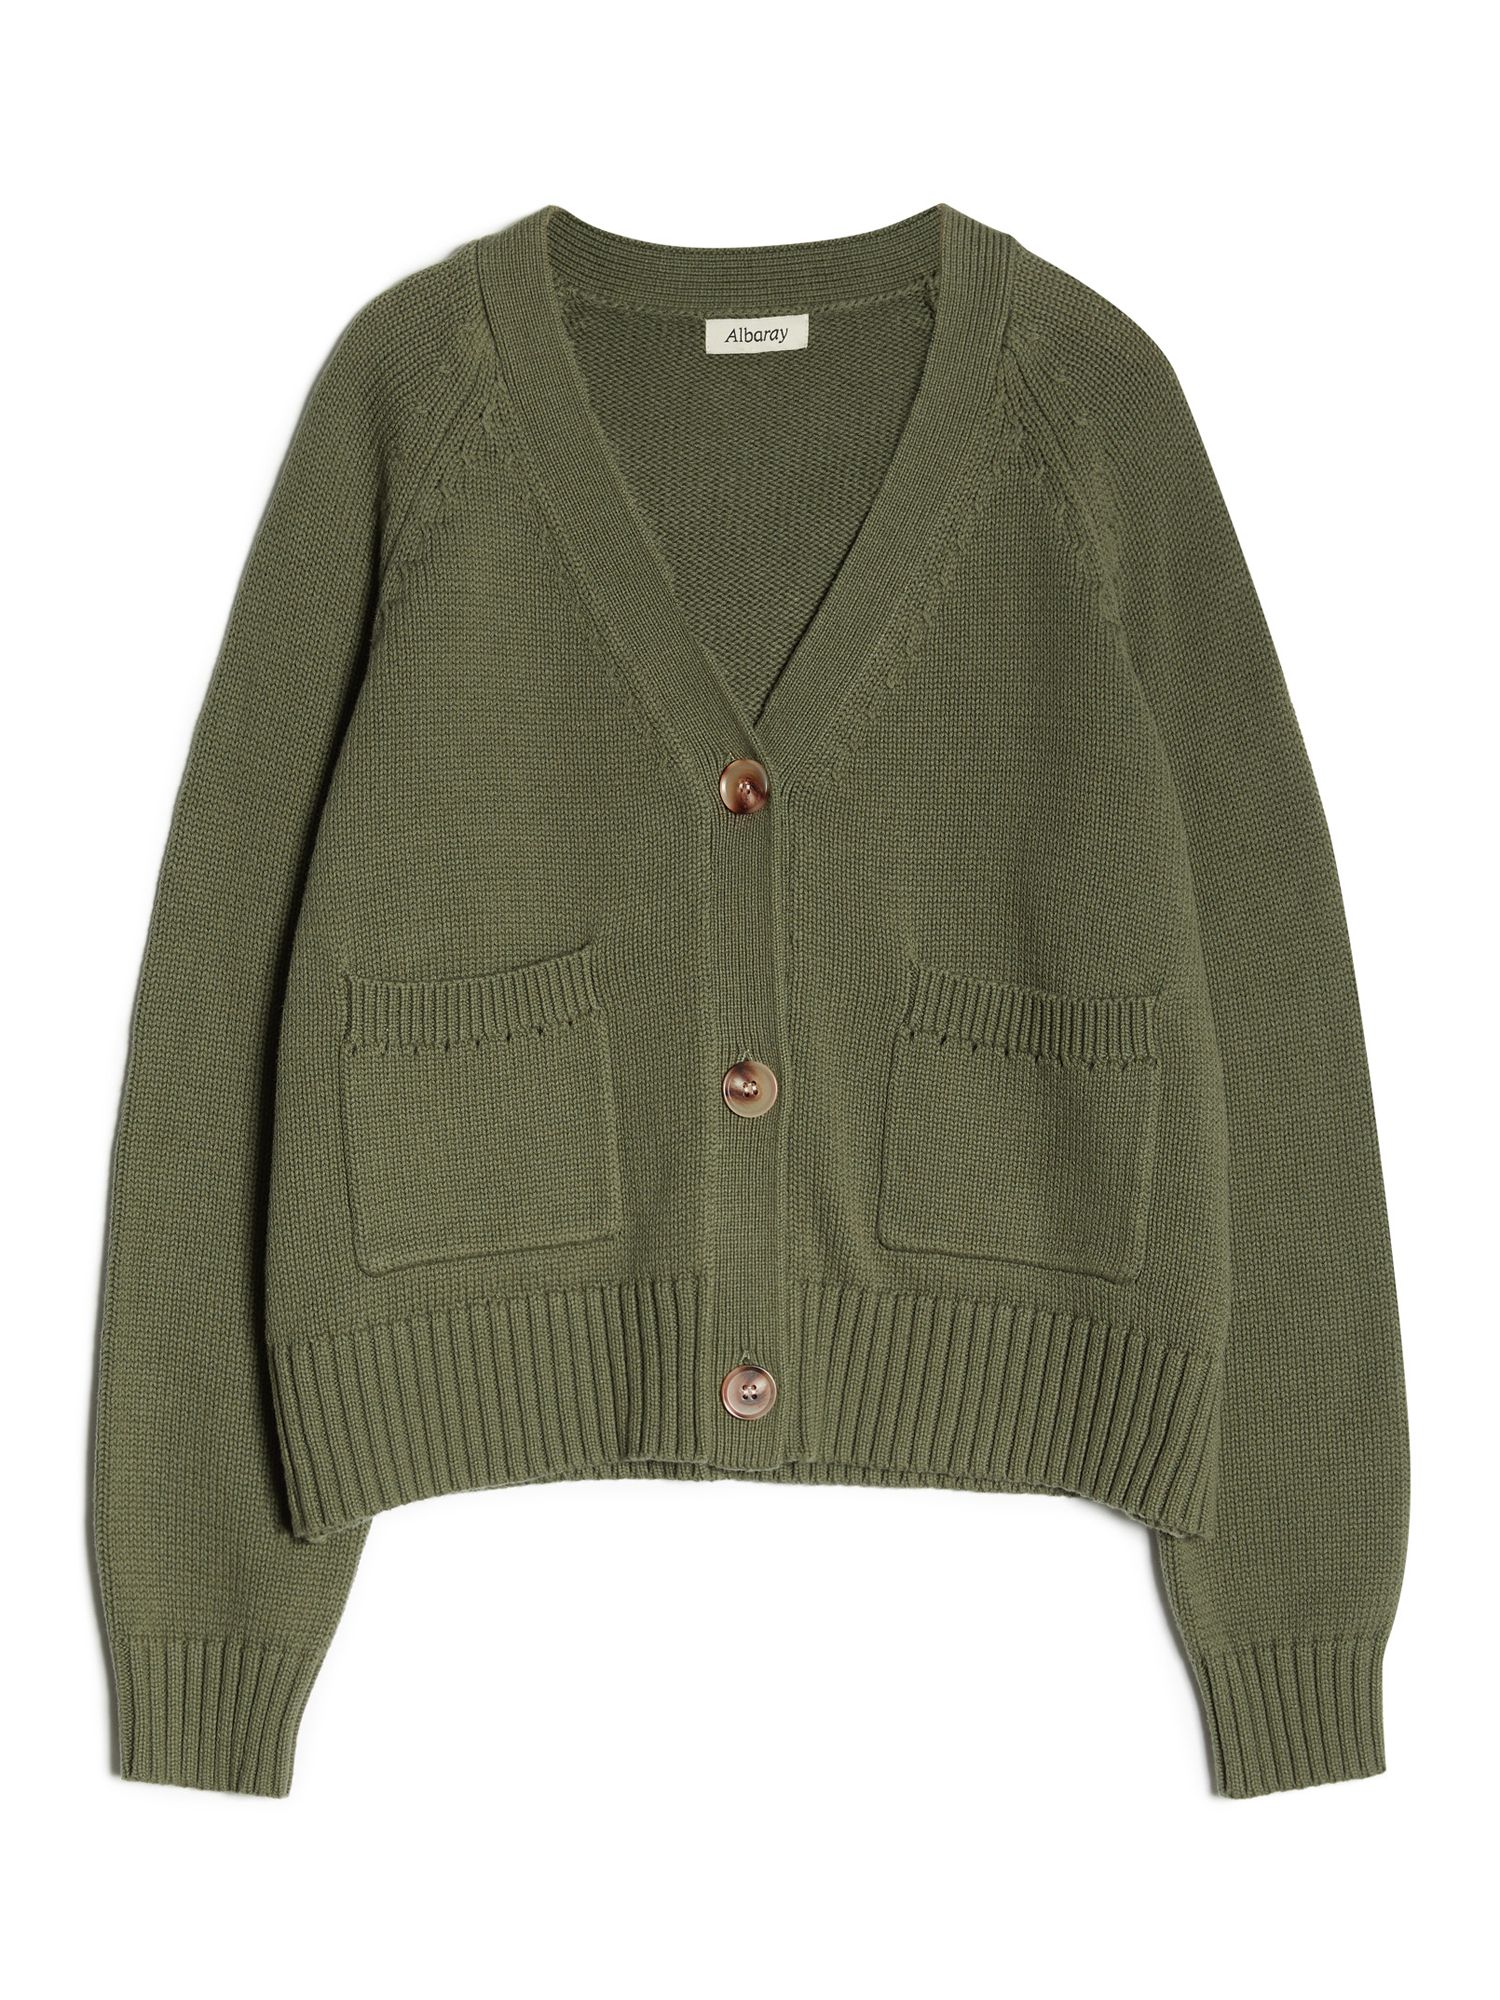 Albaray Relaxed Cotton Cardigan, Olive, 8